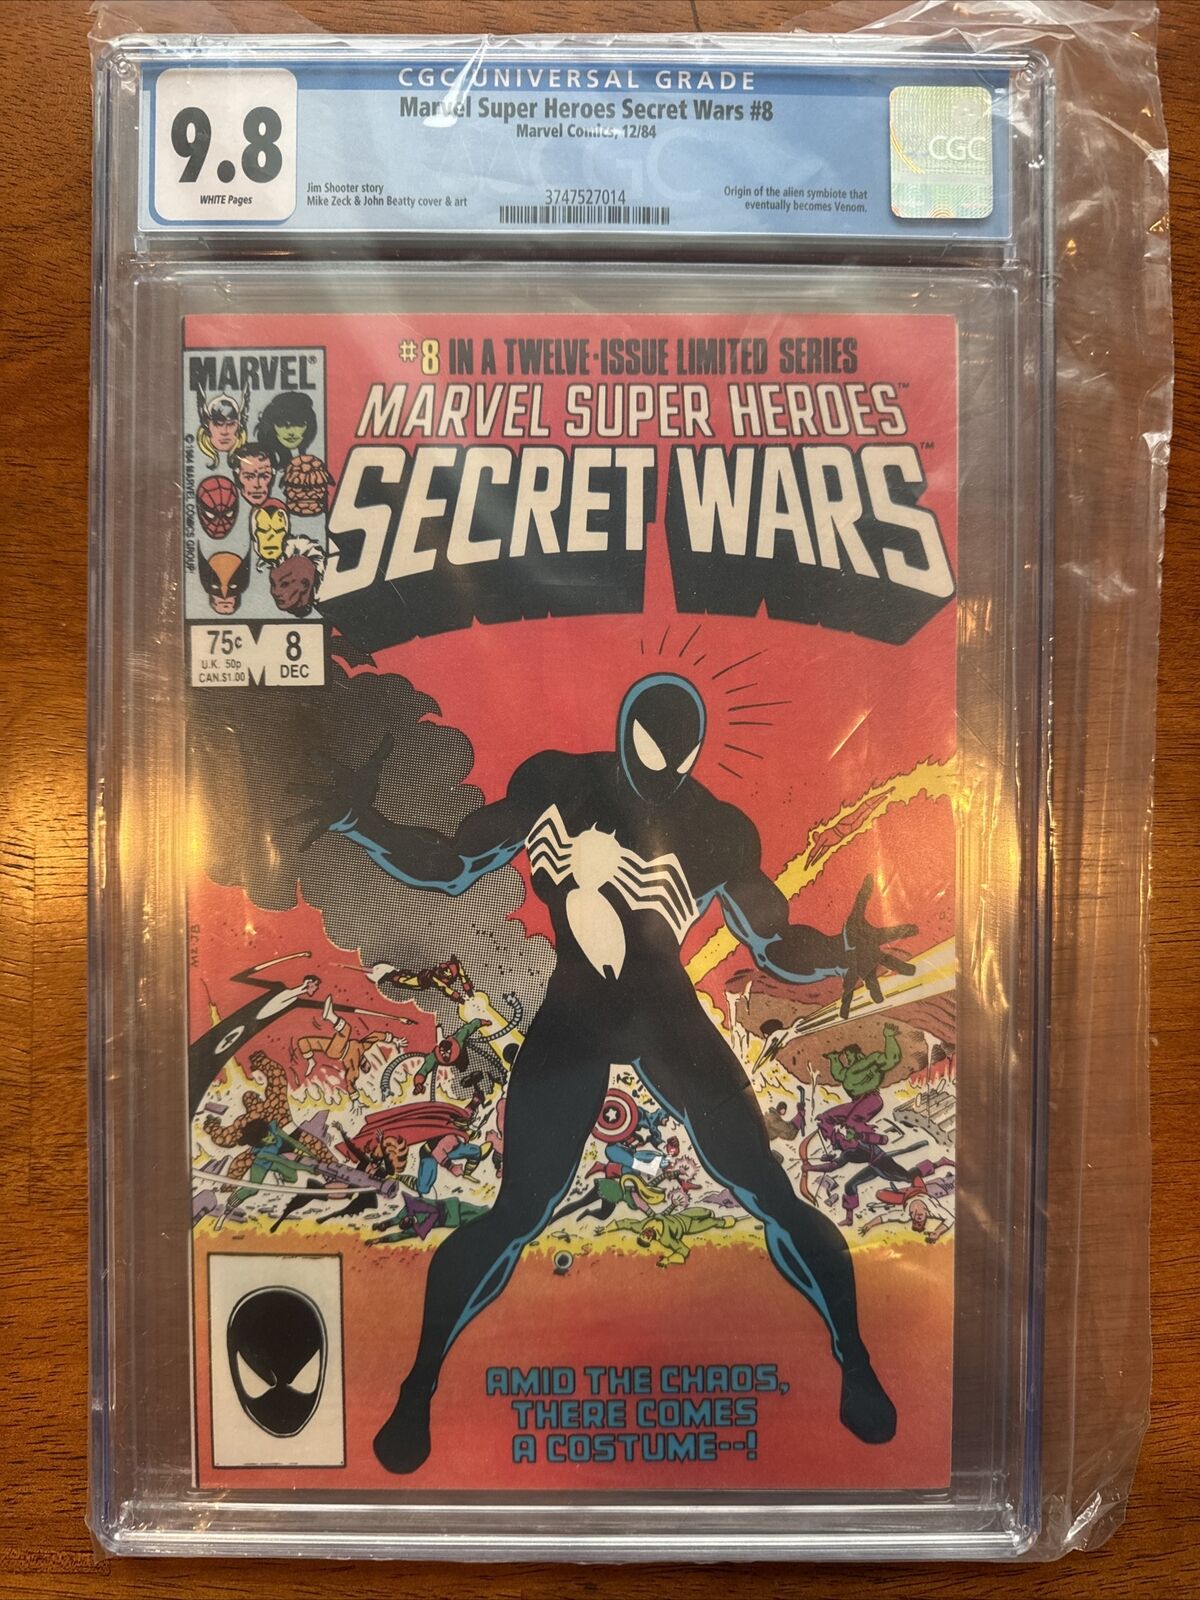 Secret Wars Limited Series #8, CGC 9.8, White Pages, 1st Printing Dec '84